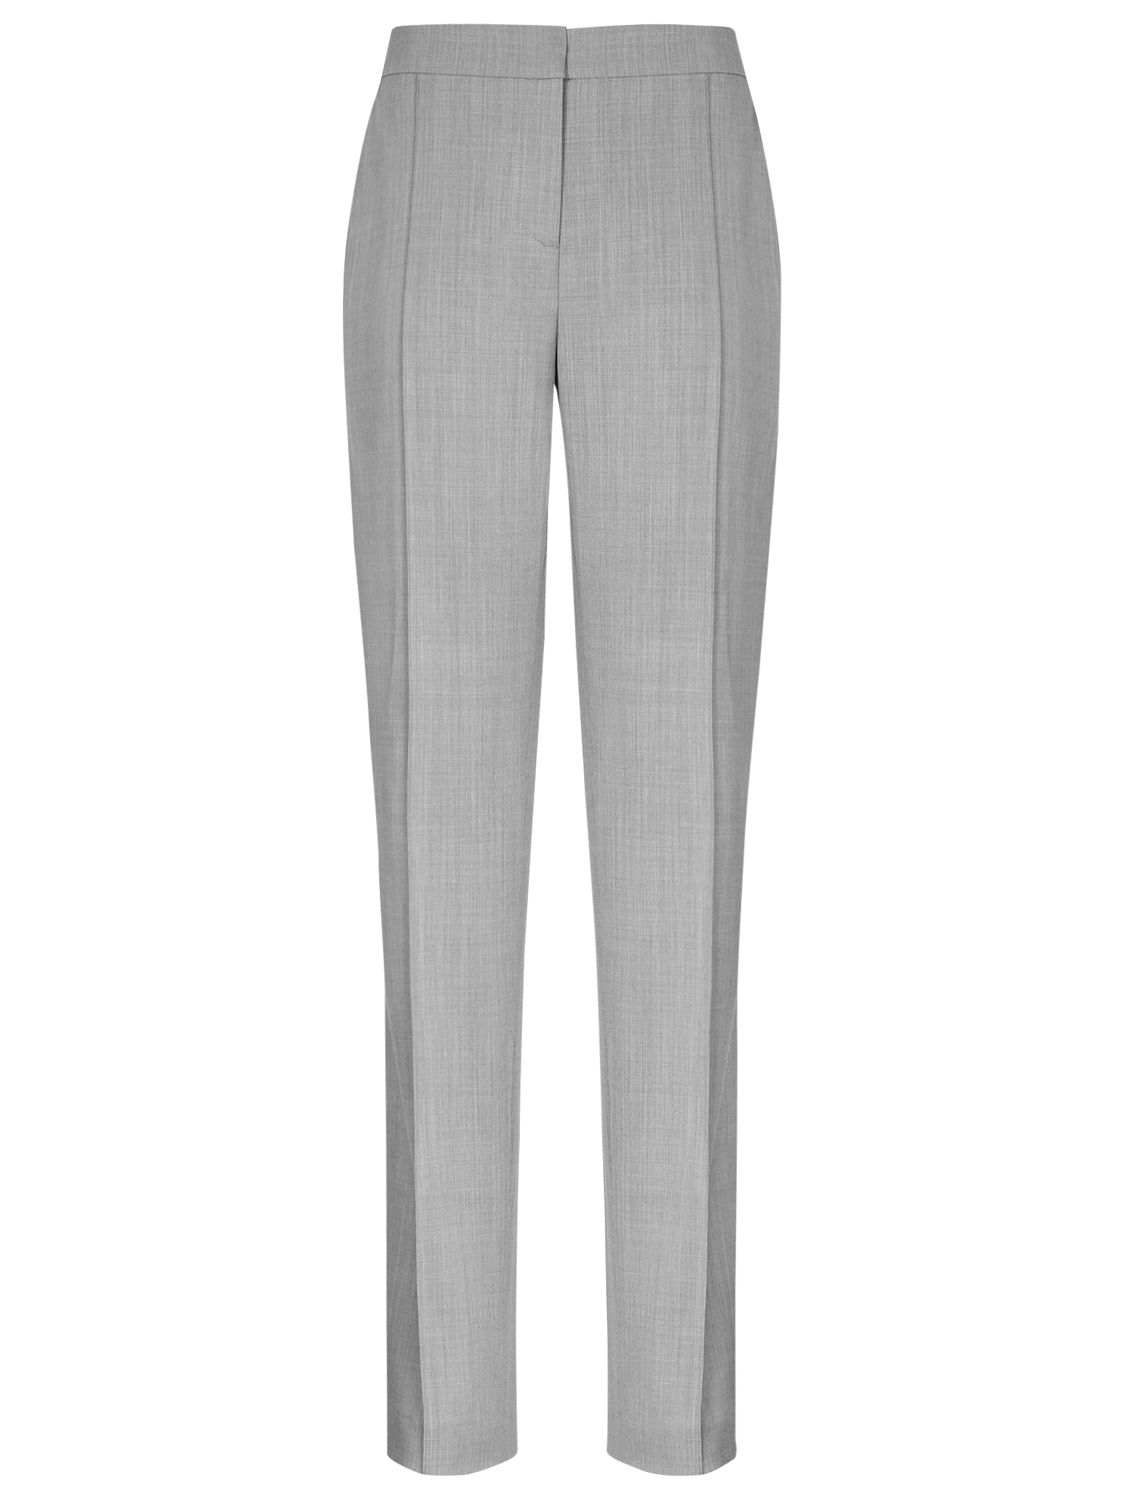 Buy Reiss Nell Arc Tailored Trousers, Mid Grey Online at johnlewis.com